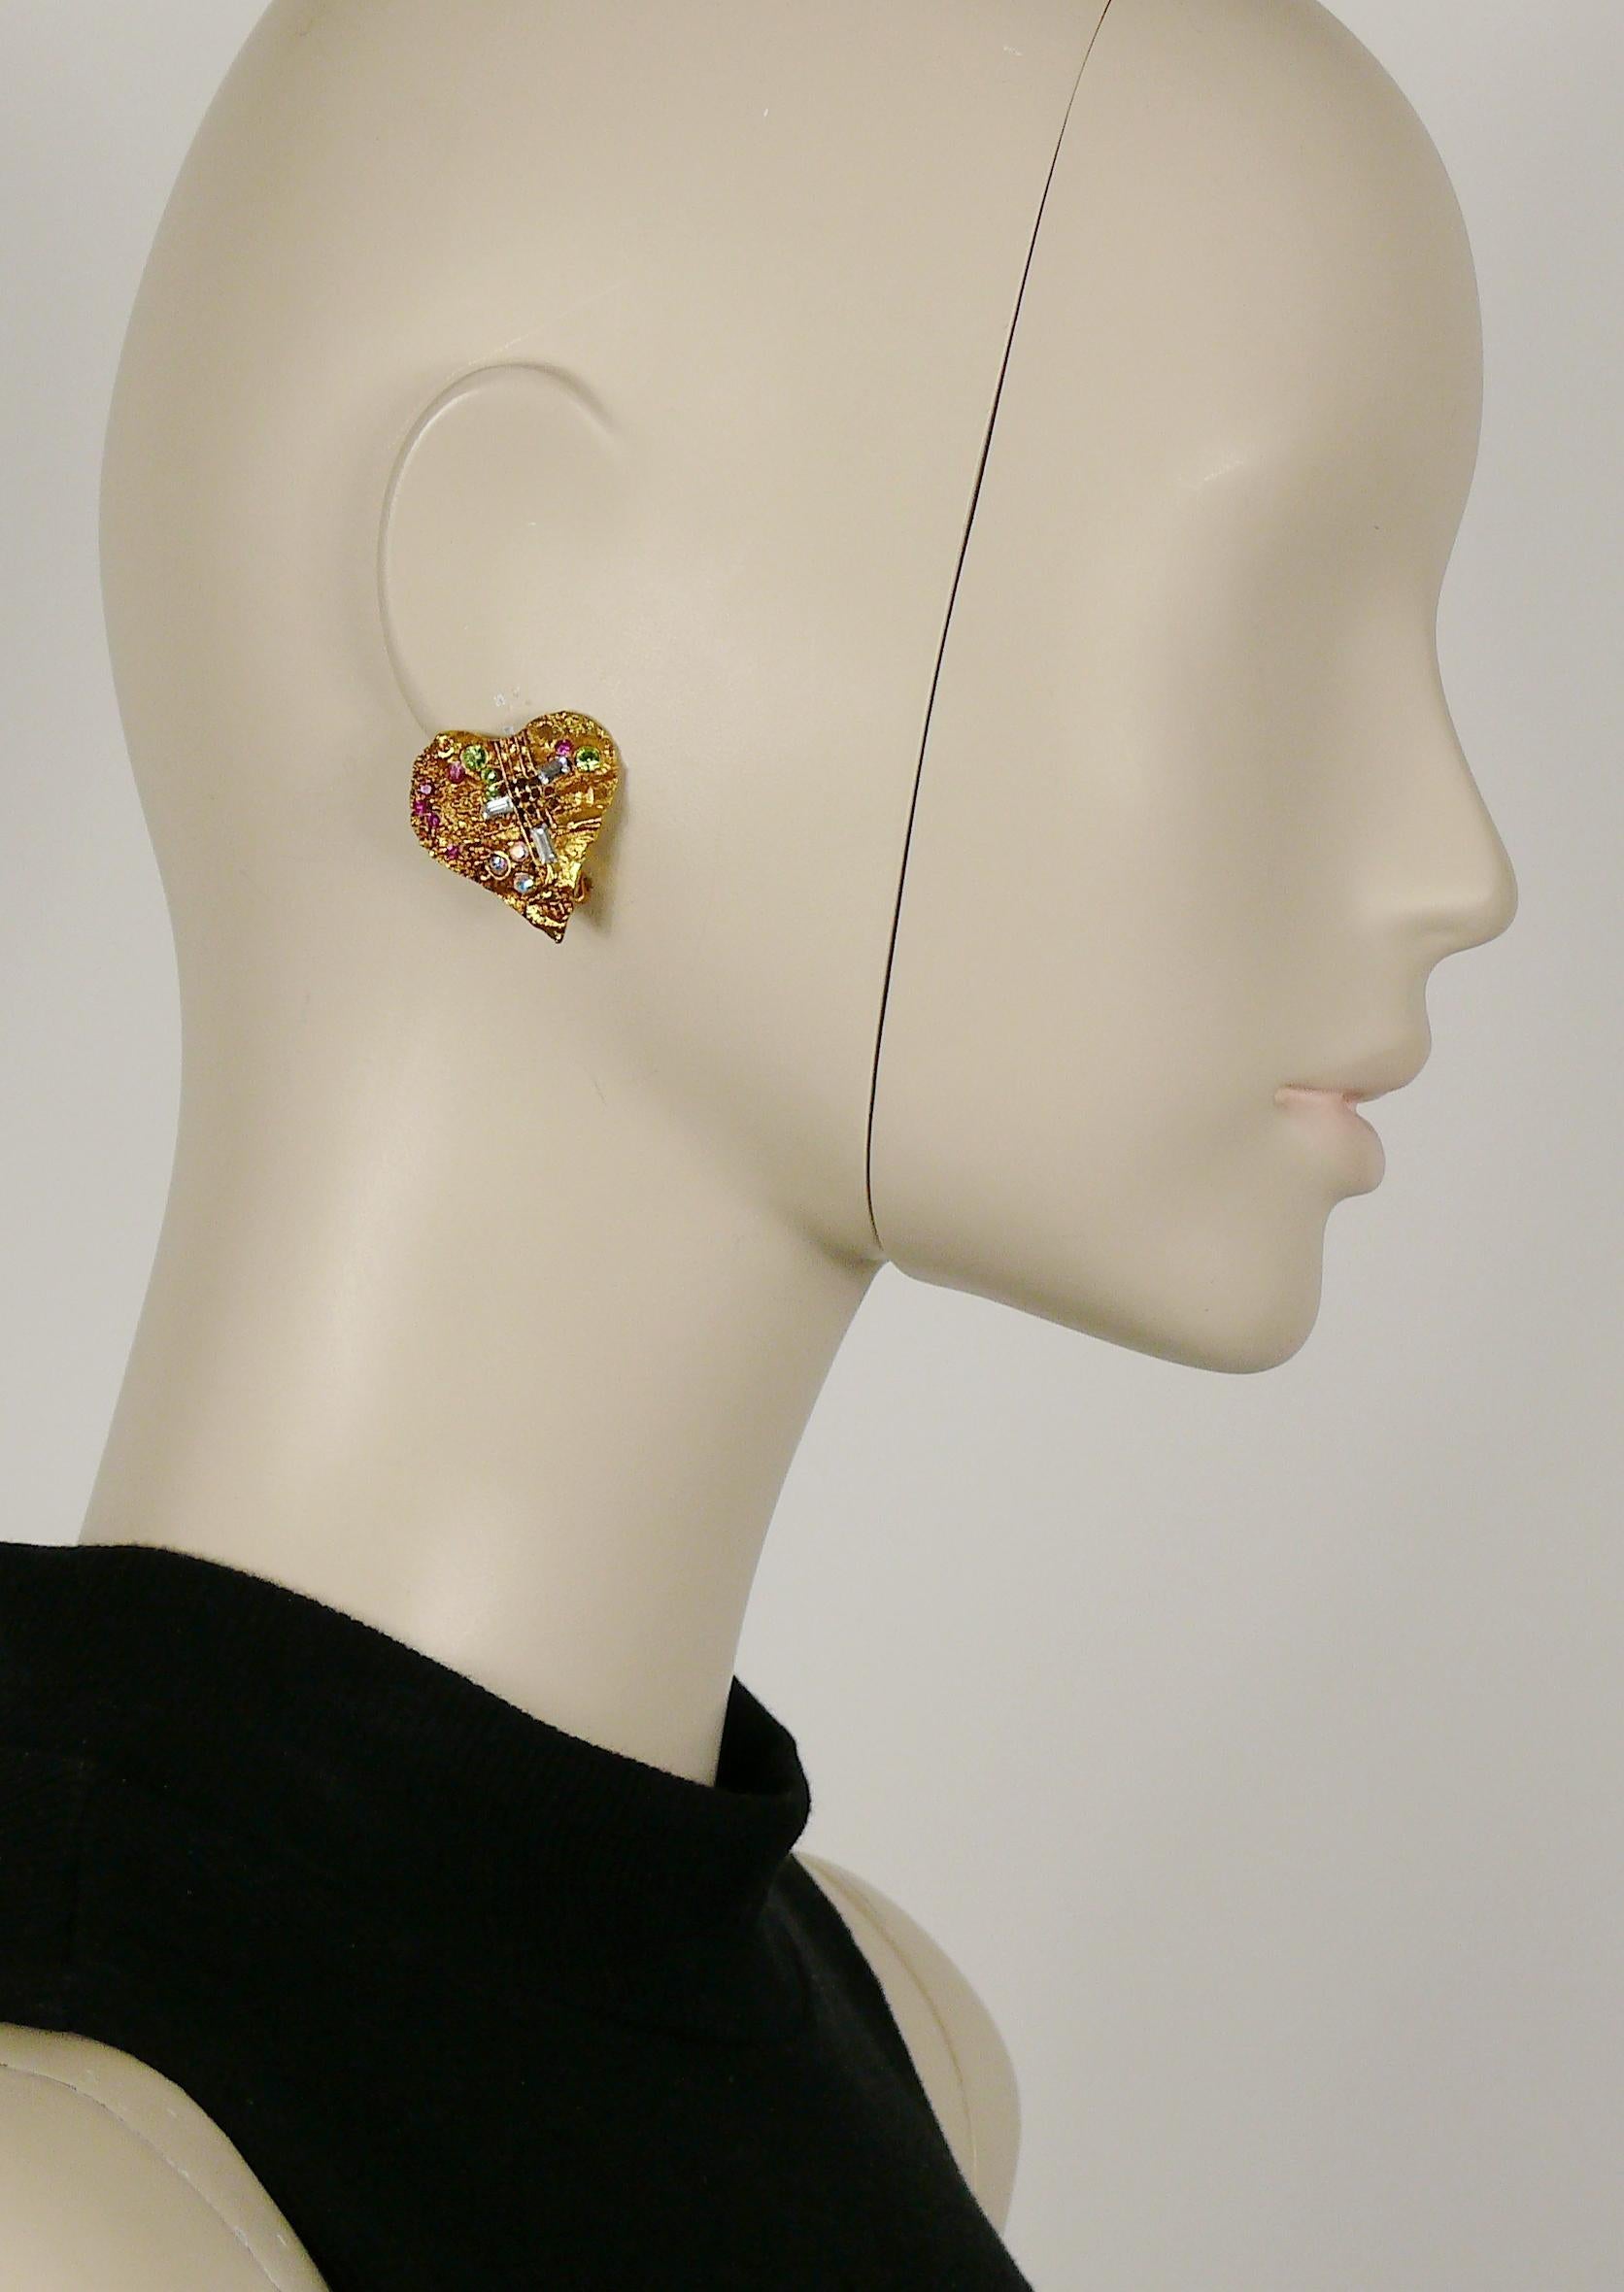 CHRISTIAN LACROIX vintage gold toned textured heart clip-on earrings embellished with multicolored crystals.

Marked CHRISTIAN LACROIX CL Made in France.

Indicative measurements : height approx. 3 cm (1.18 inches) / max. width approx 2.6 cm (1.02